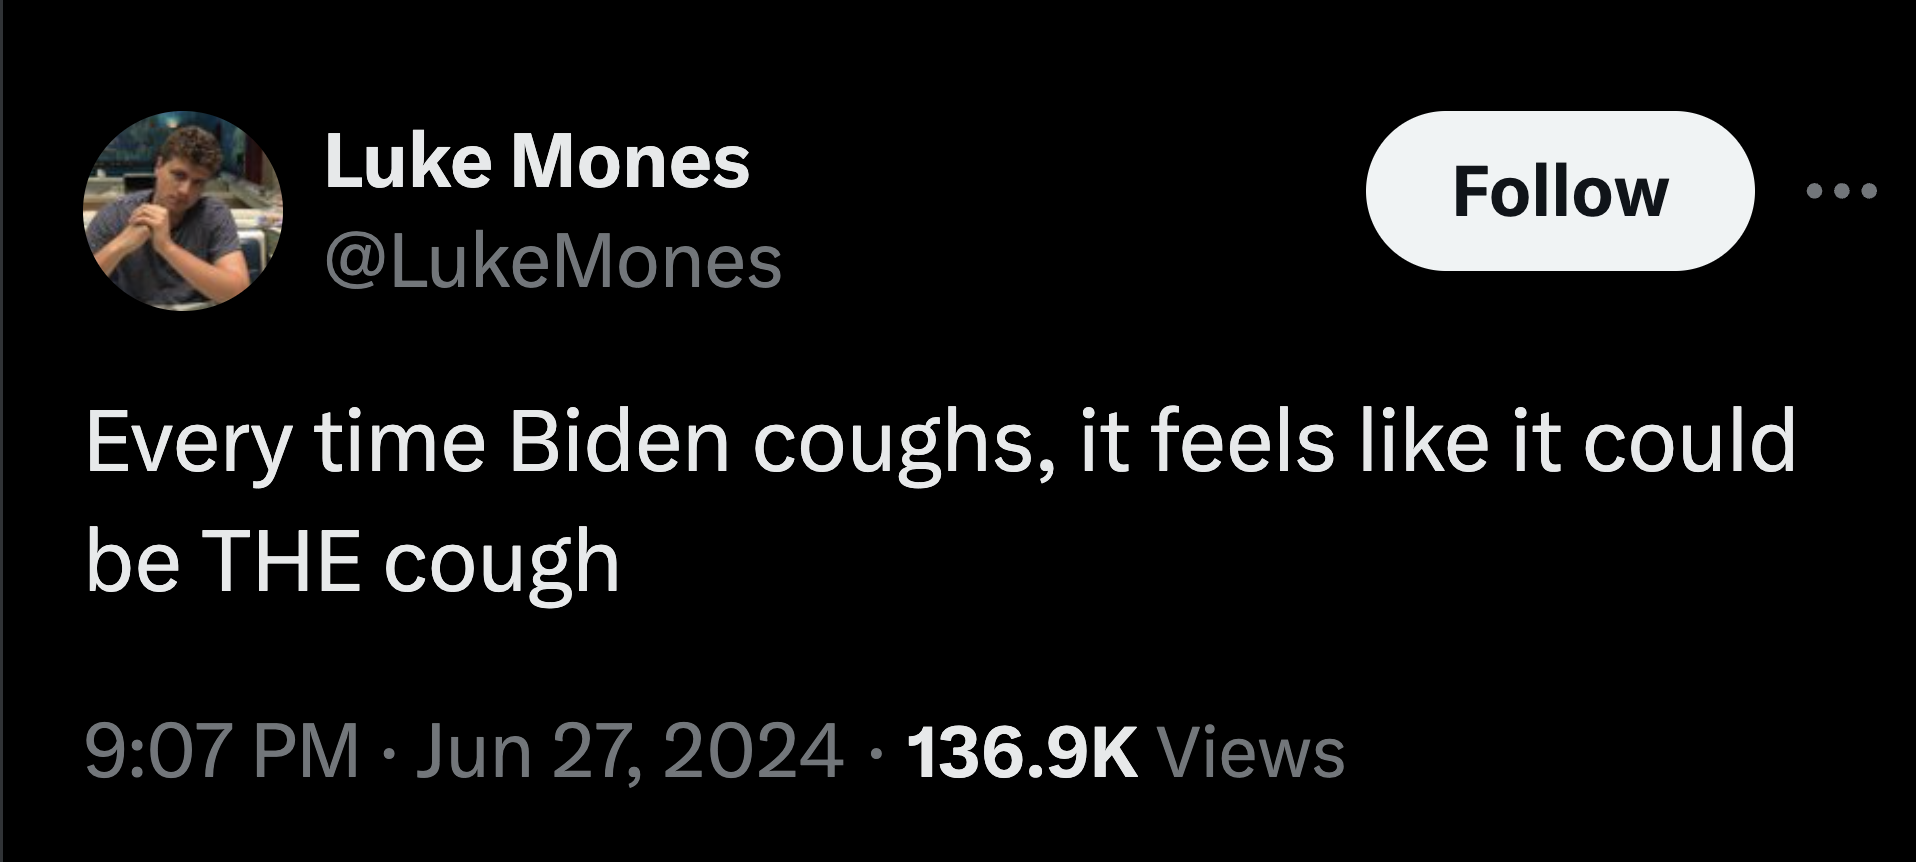 parallel - Luke Mones Every time Biden coughs, it feels it could be The cough Views